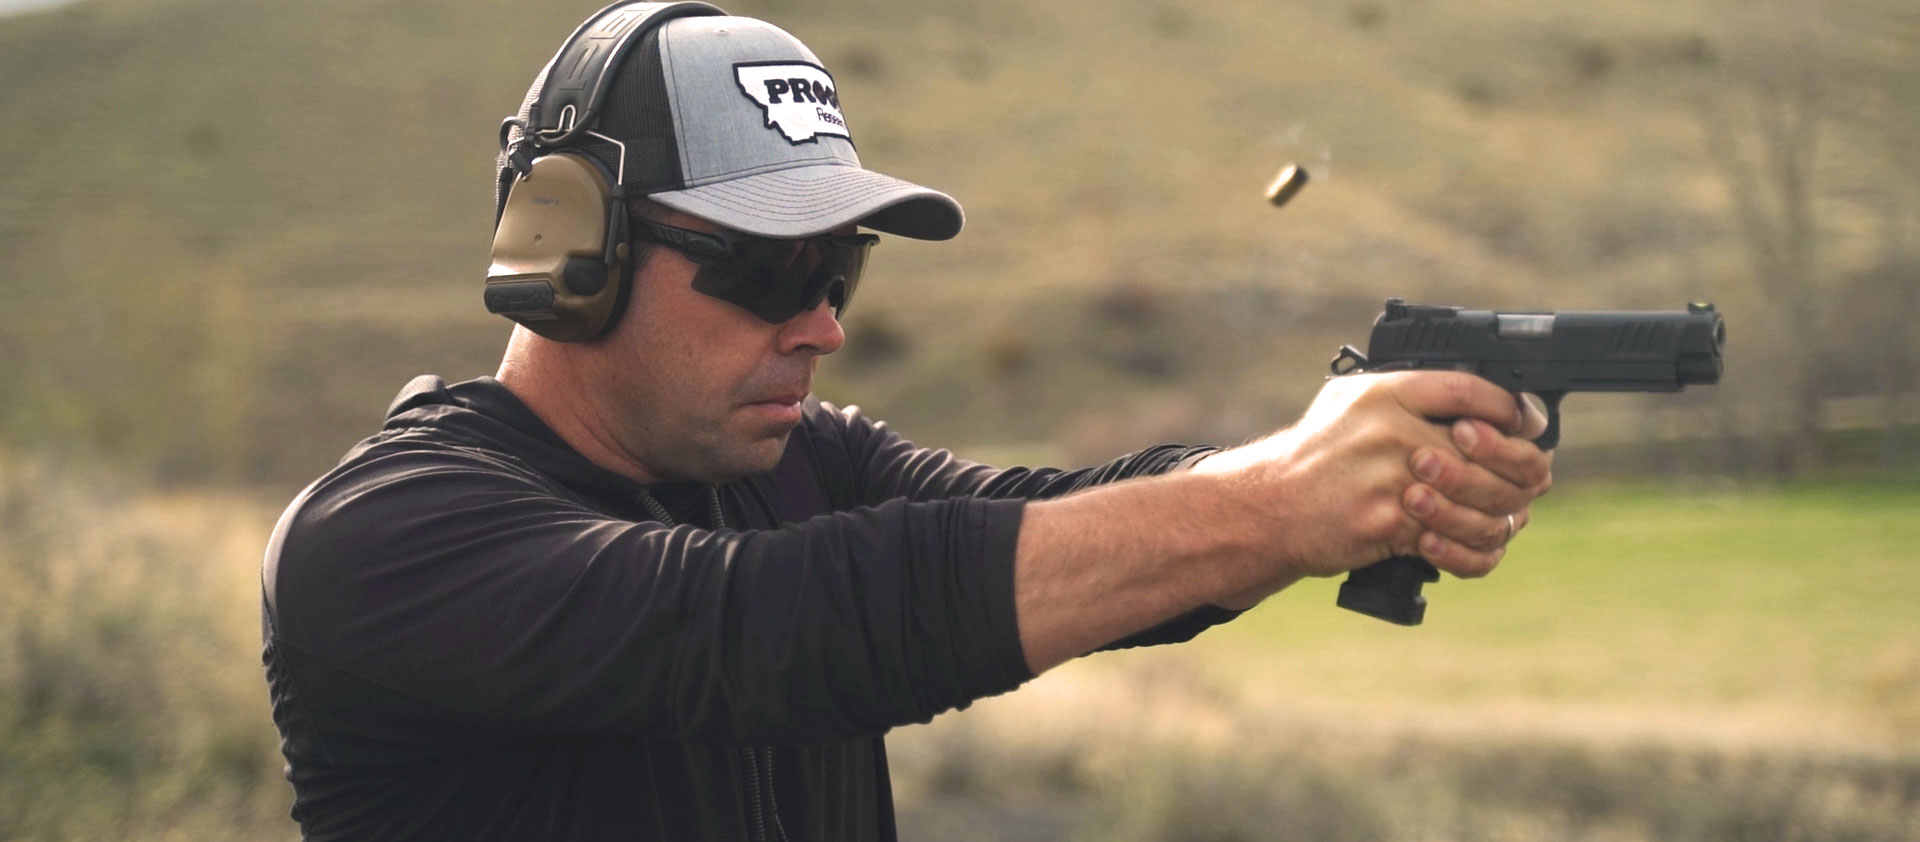 Sean Murphy shooting a 9mm pistol with brass in the air